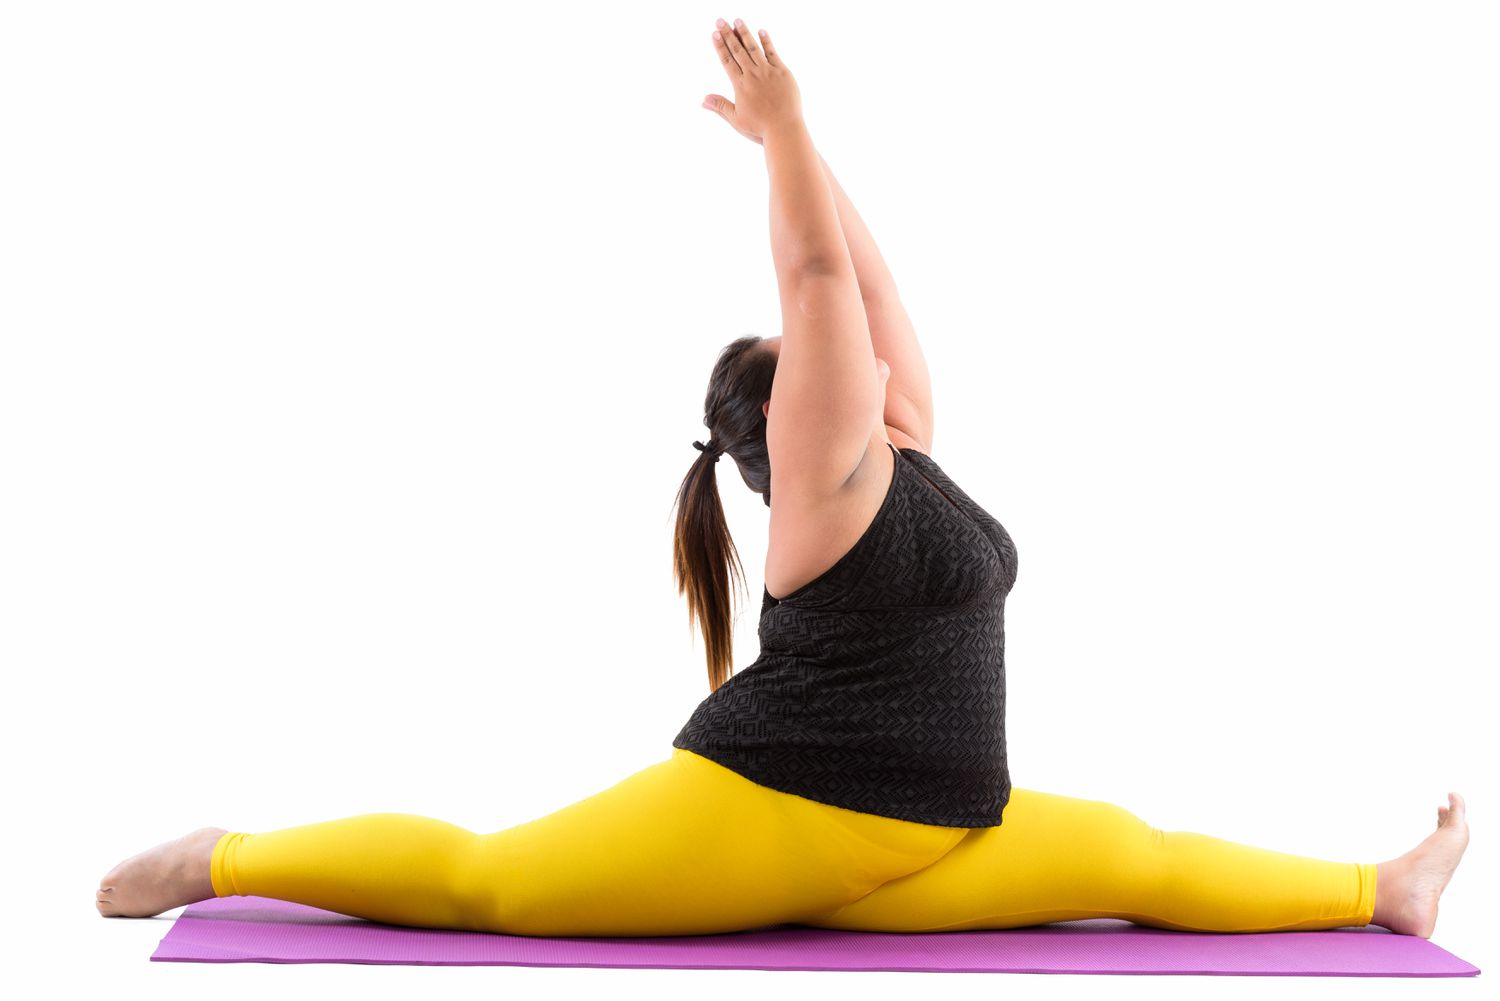 Bigger-bodied woman doing a yoga pose on a mat